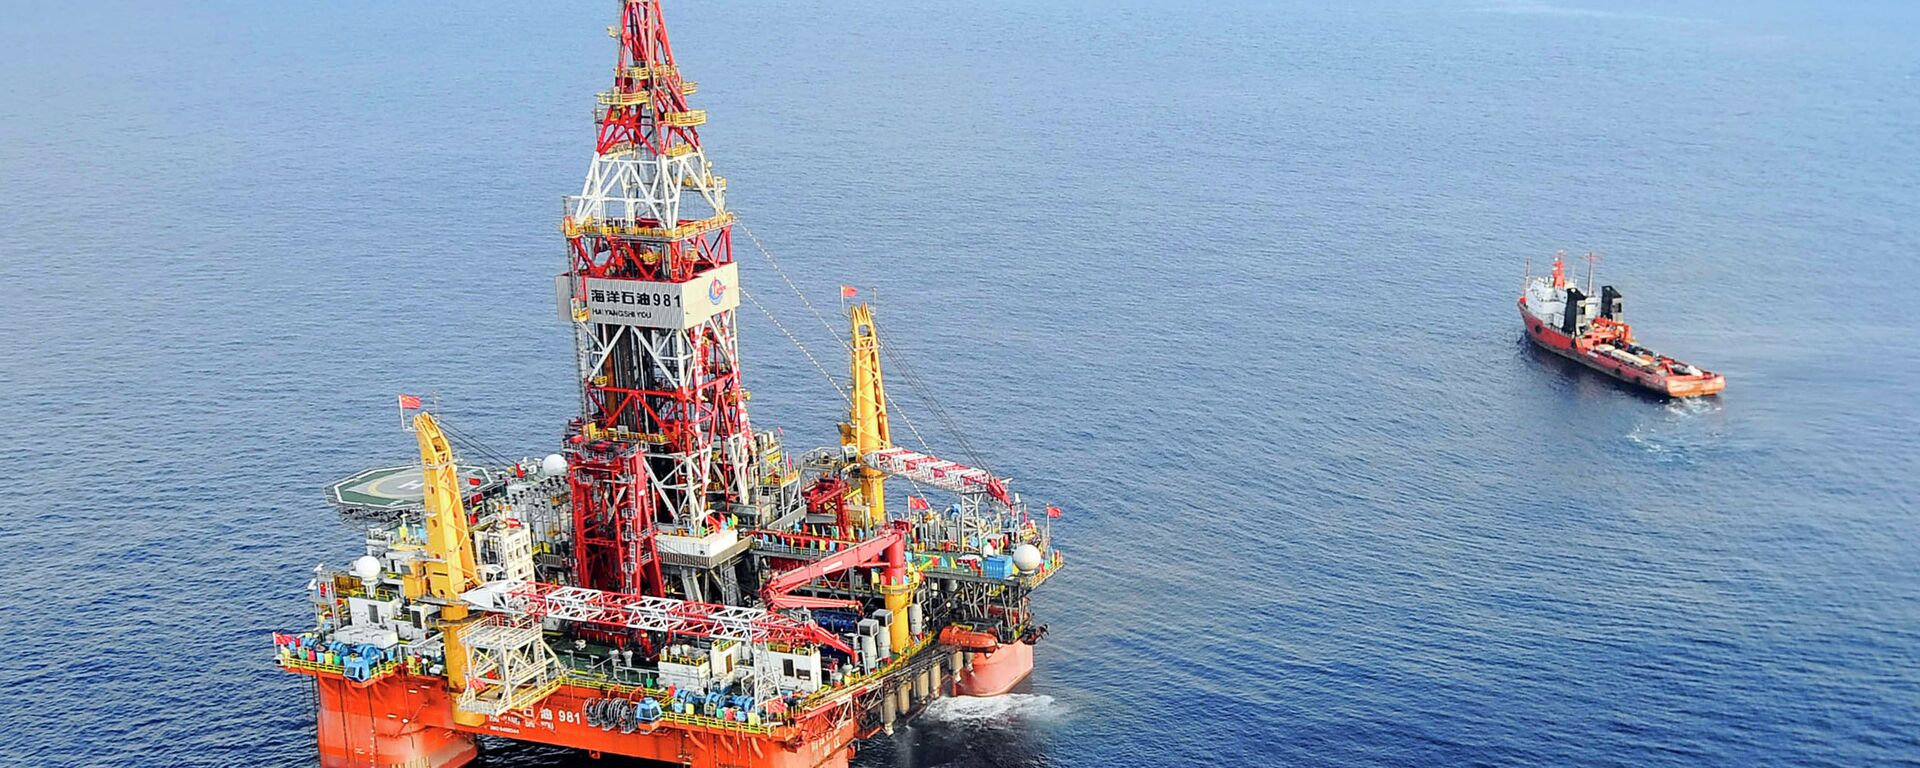 Haiyang Shiyou oil rig 981, the first deep-water drilling rig developed in China, is pictured at 320 kilometers (200 miles) southeast of Hong Kong in the South China Sea. - Sputnik International, 1920, 29.03.2022